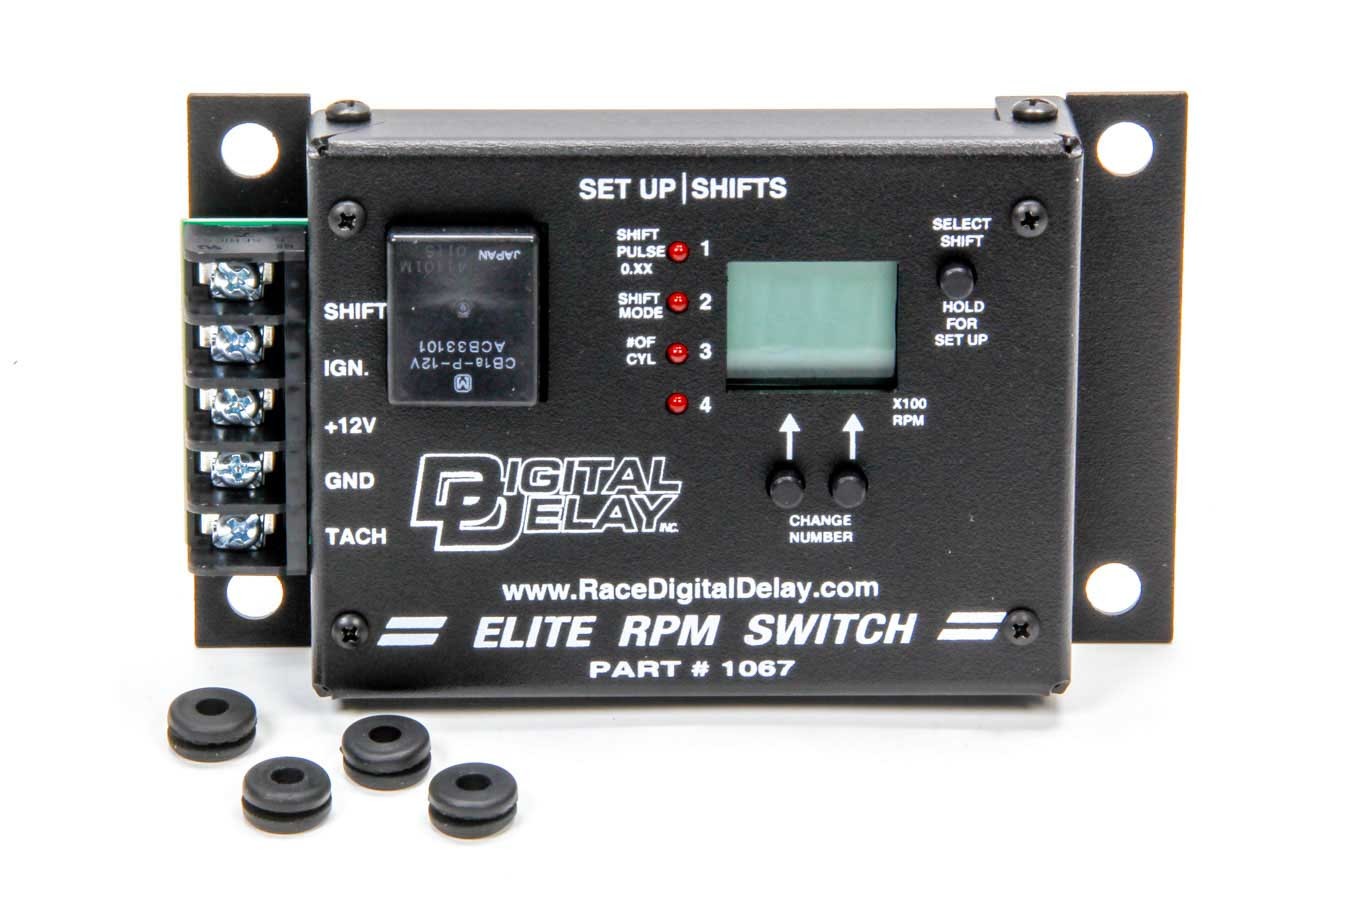 Biondo DDI1067 Shifter Controller, Elite RPM Switch, Digital Display, Aluminum, Air / CO2 / Electric Shifters, Kit